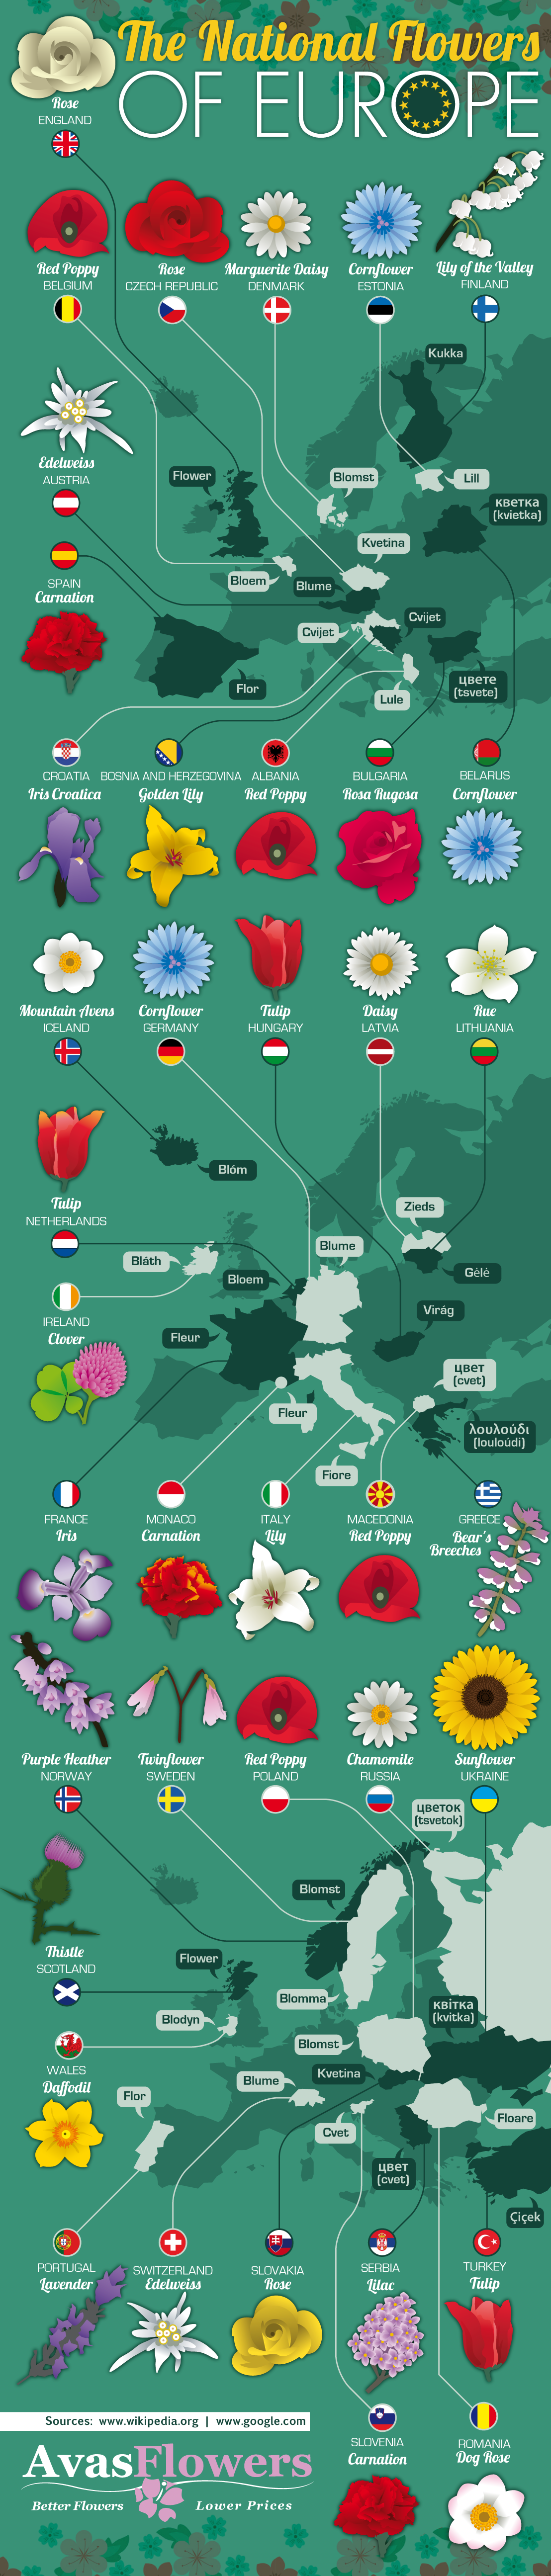 The National Flowers of Europe - Avasflowers.net - Infographic